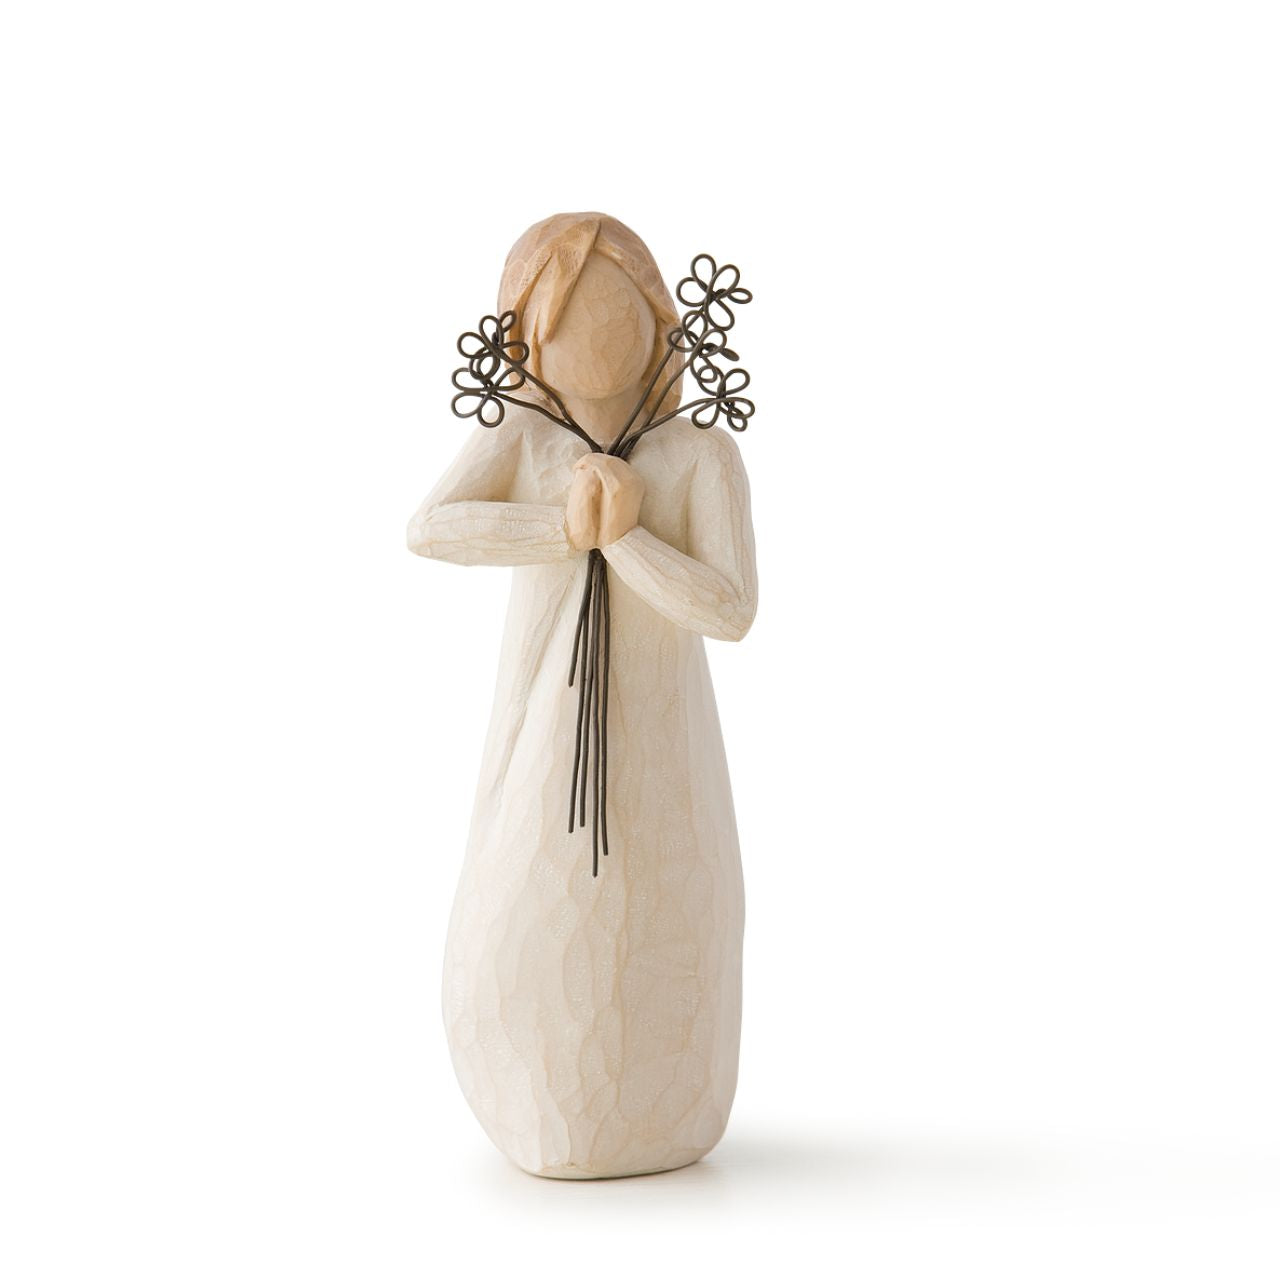 Willow Tree Friendship  Willow Tree is an intimate line of figurative sculptures representing sentiments of love, closeness, healing, courage, hope...all the emotions we encounter in life. Artist Susan Lordi hand carves the original of each Willow Tree sculpture.